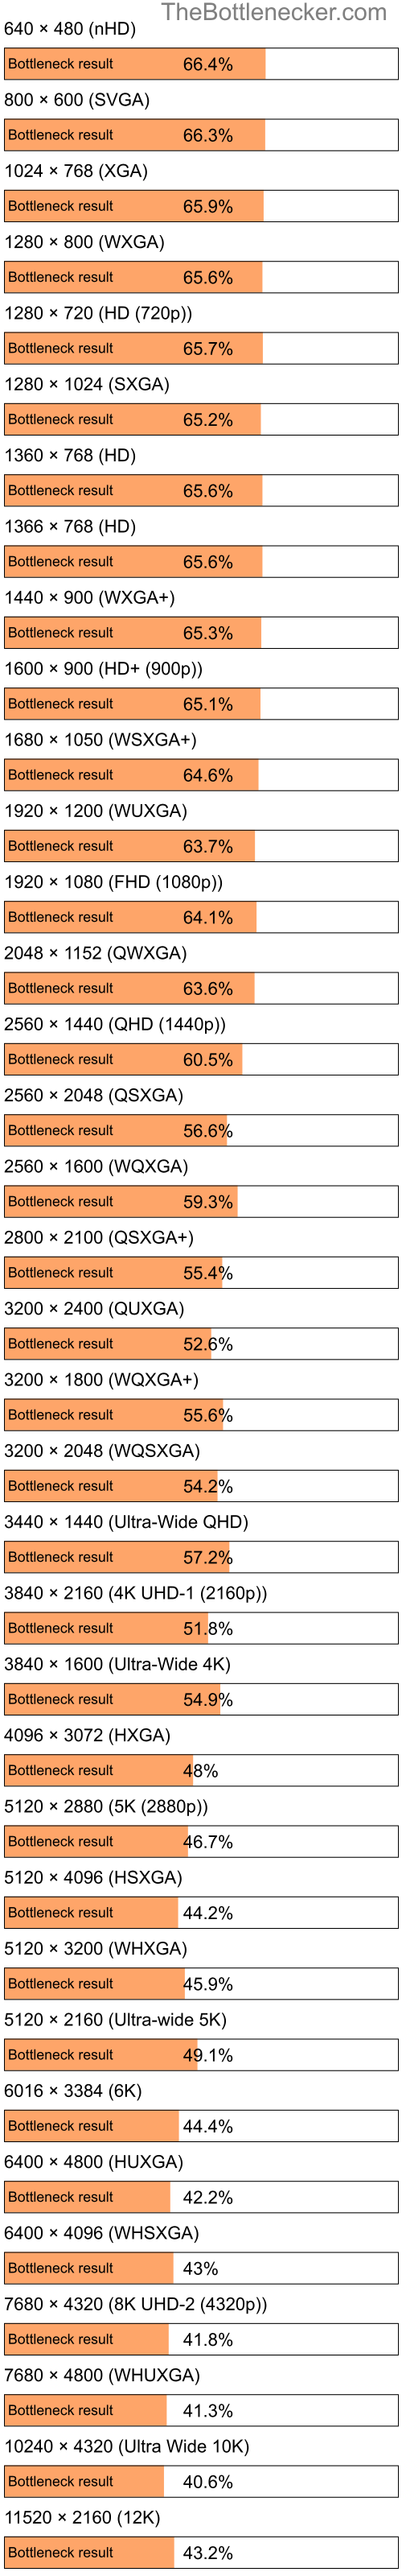 Bottleneck results by resolution for Intel Core i5-6500 and NVIDIA GeForce RTX 4070 Ti in General Tasks